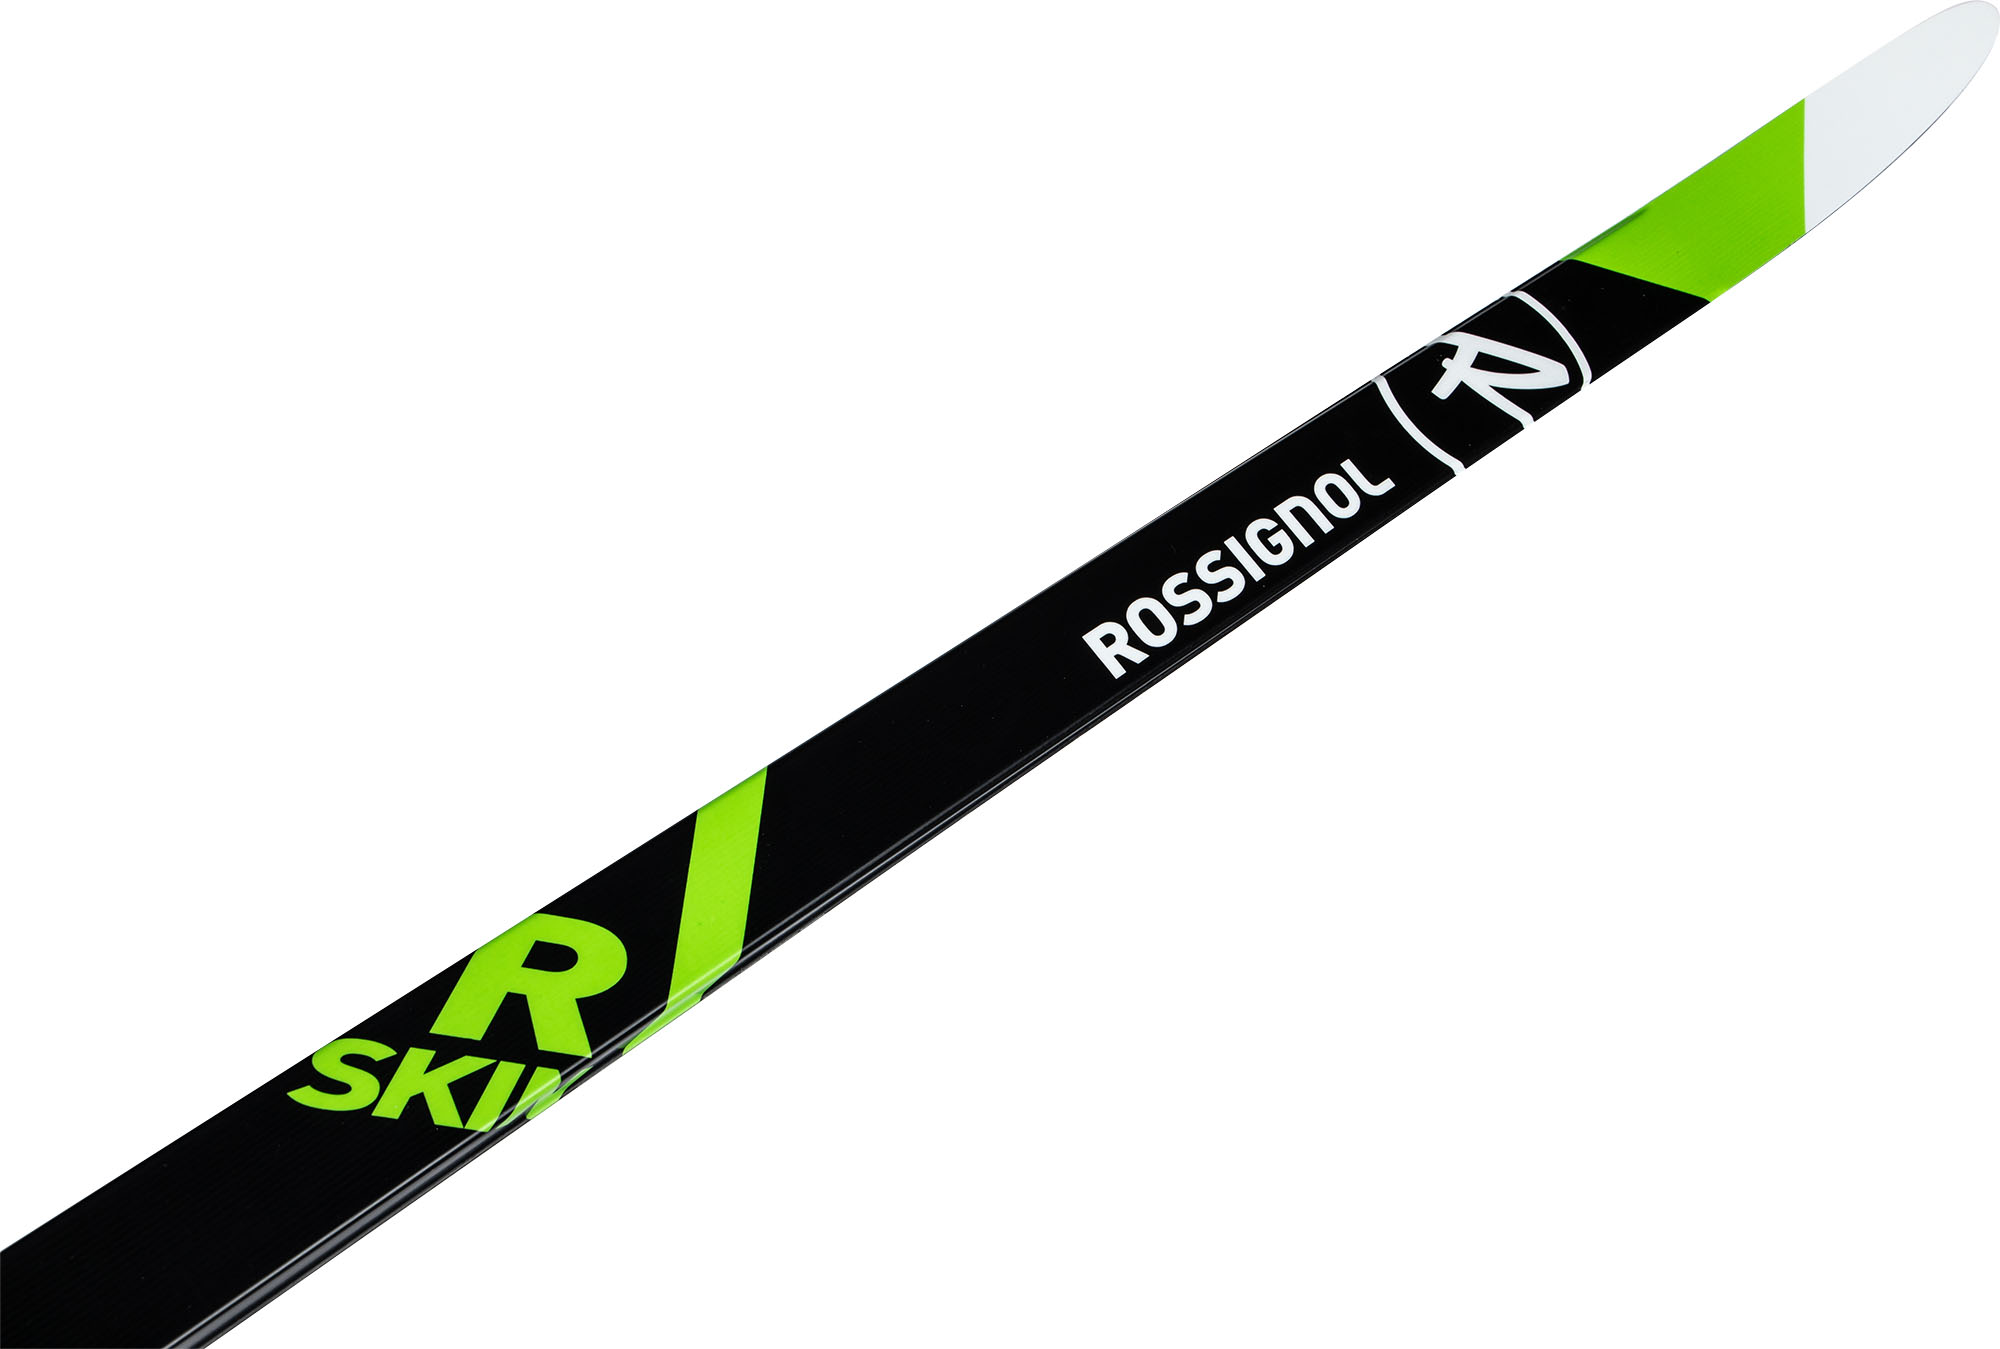 Cross-country skis